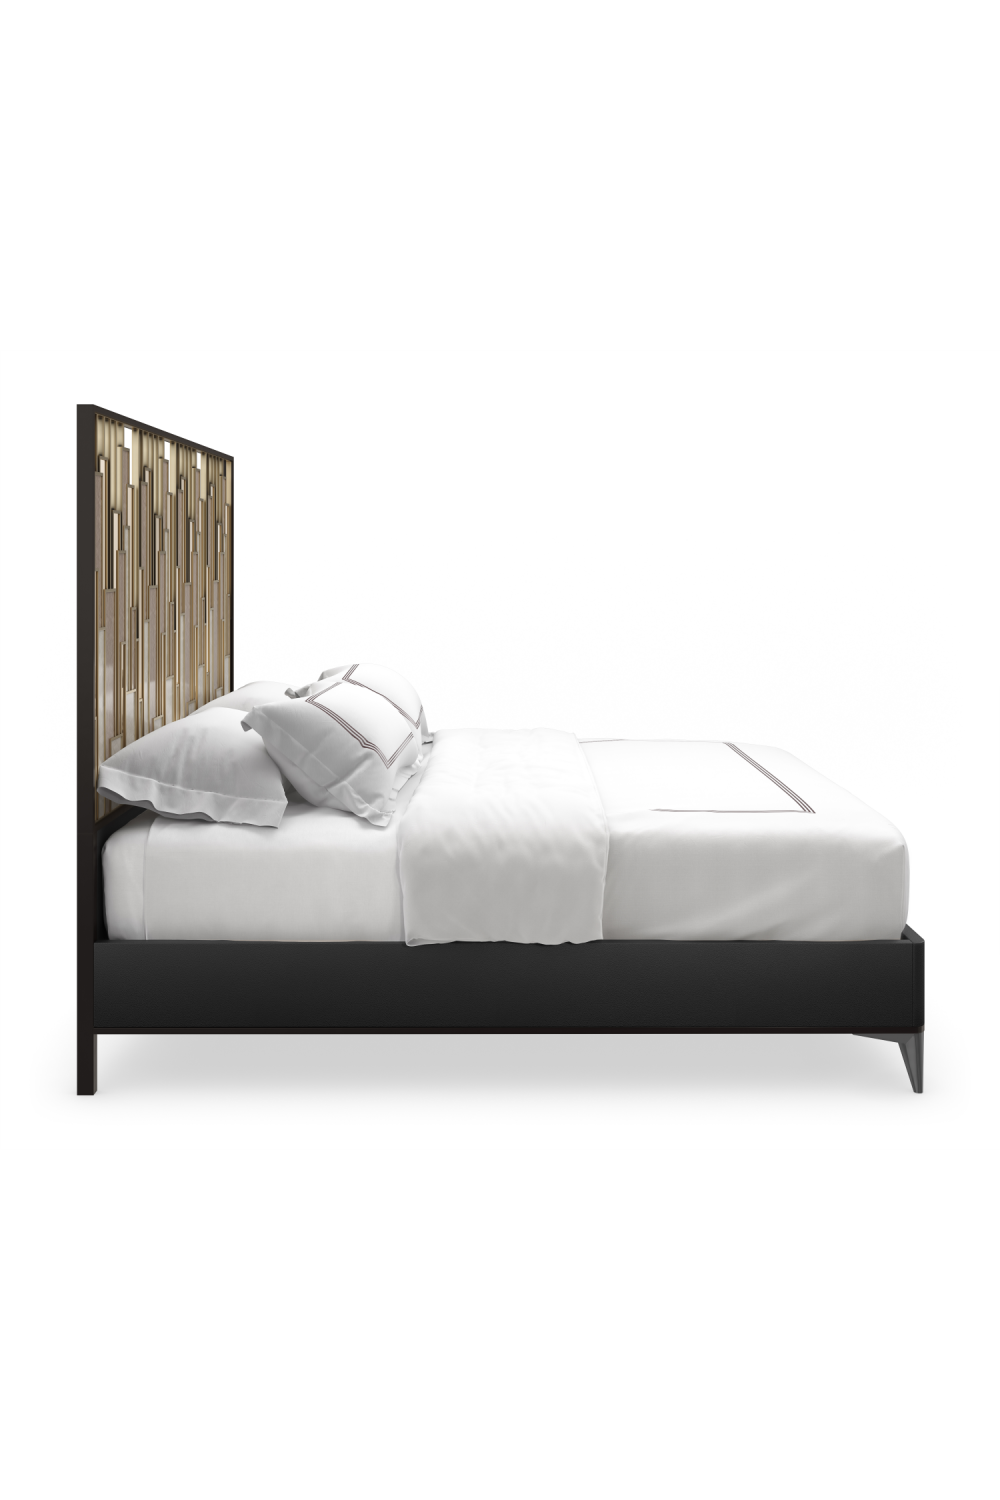 Architectural Metal King Bed | Caracole Cityscape | Oroa.com